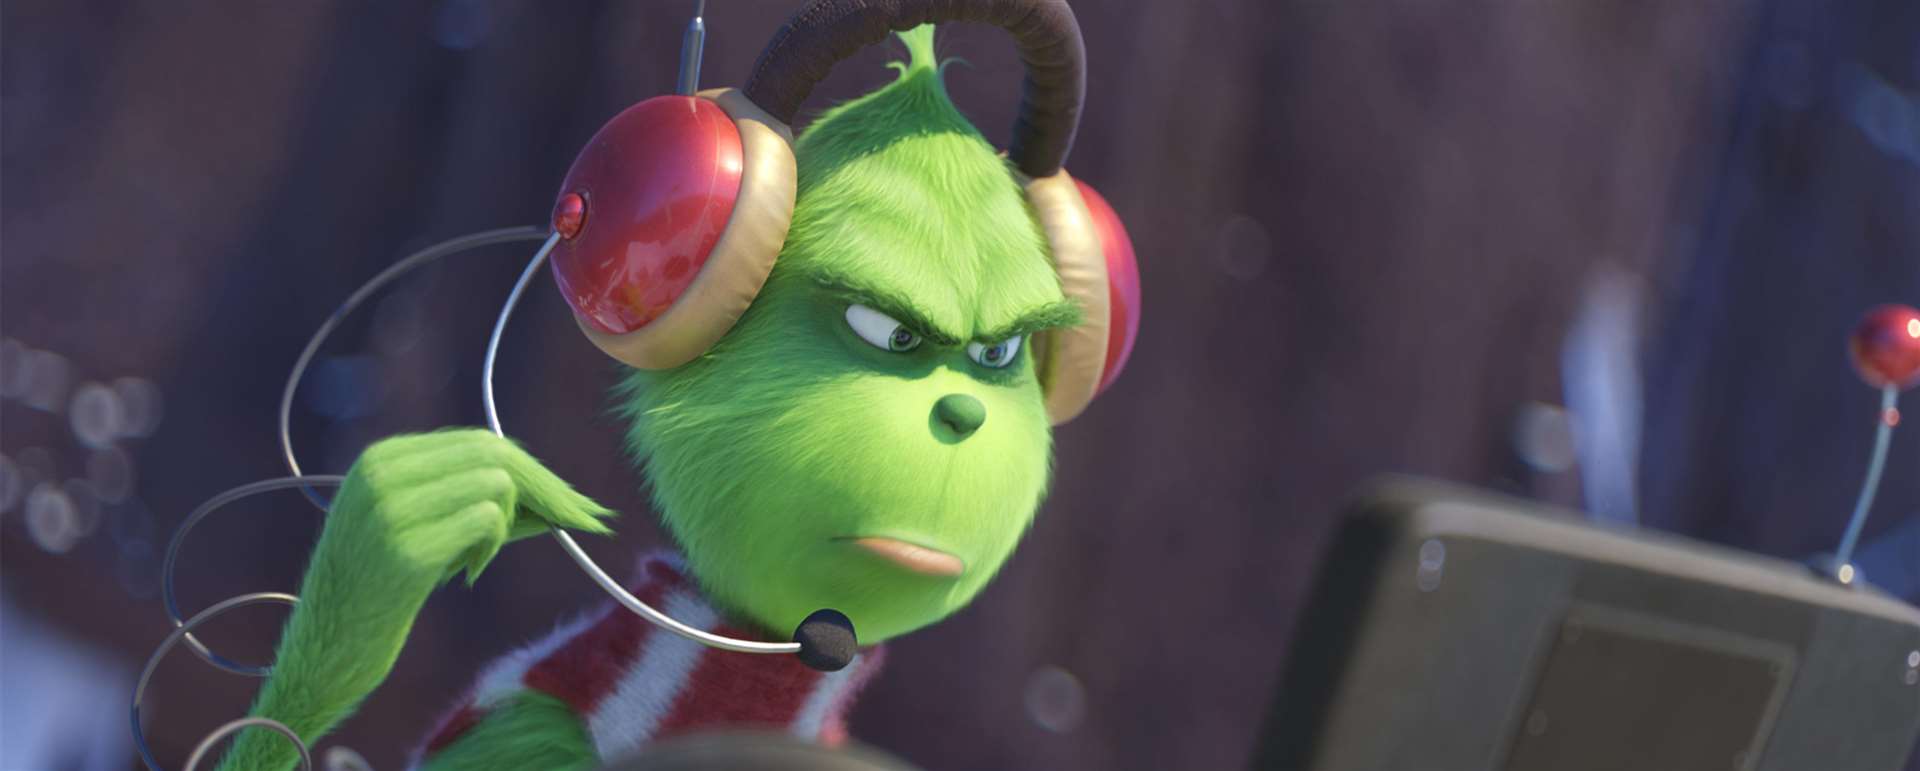 The Grinch (voiced by Benedict Cumberbatch) is in cinemas this weekend.